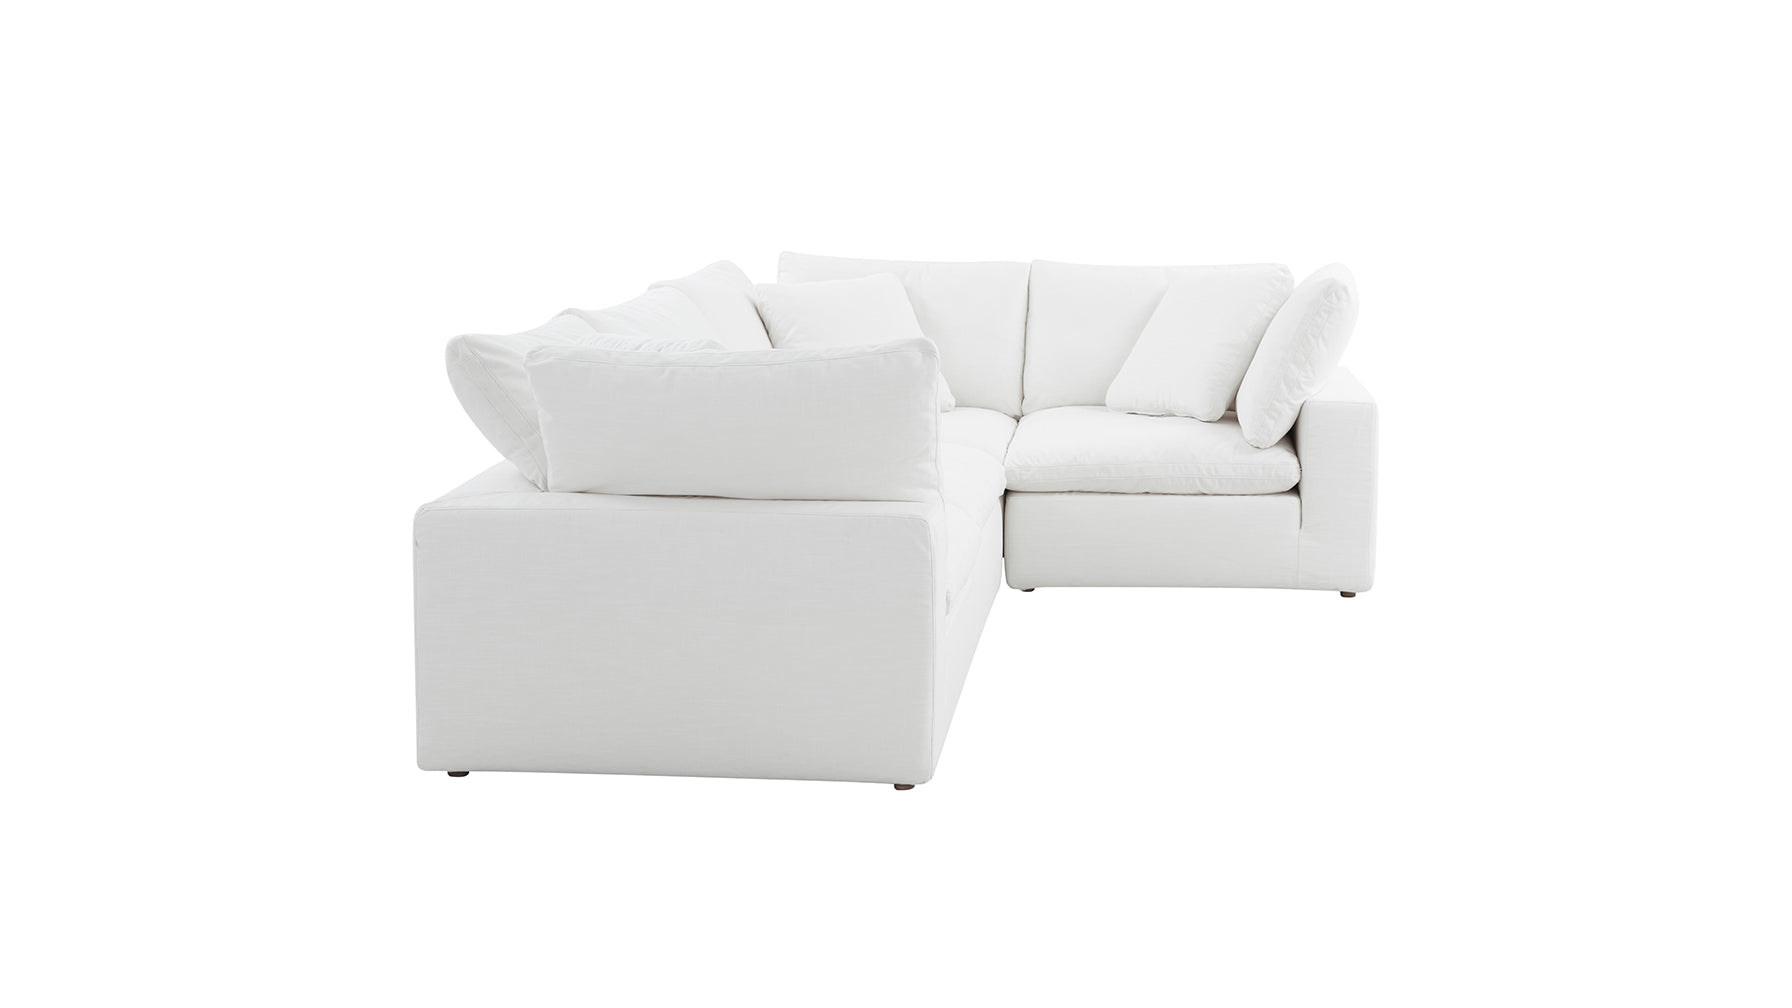 Movie Night™ 4-Piece Modular Sectional Closed, Large, Brie - Image 7